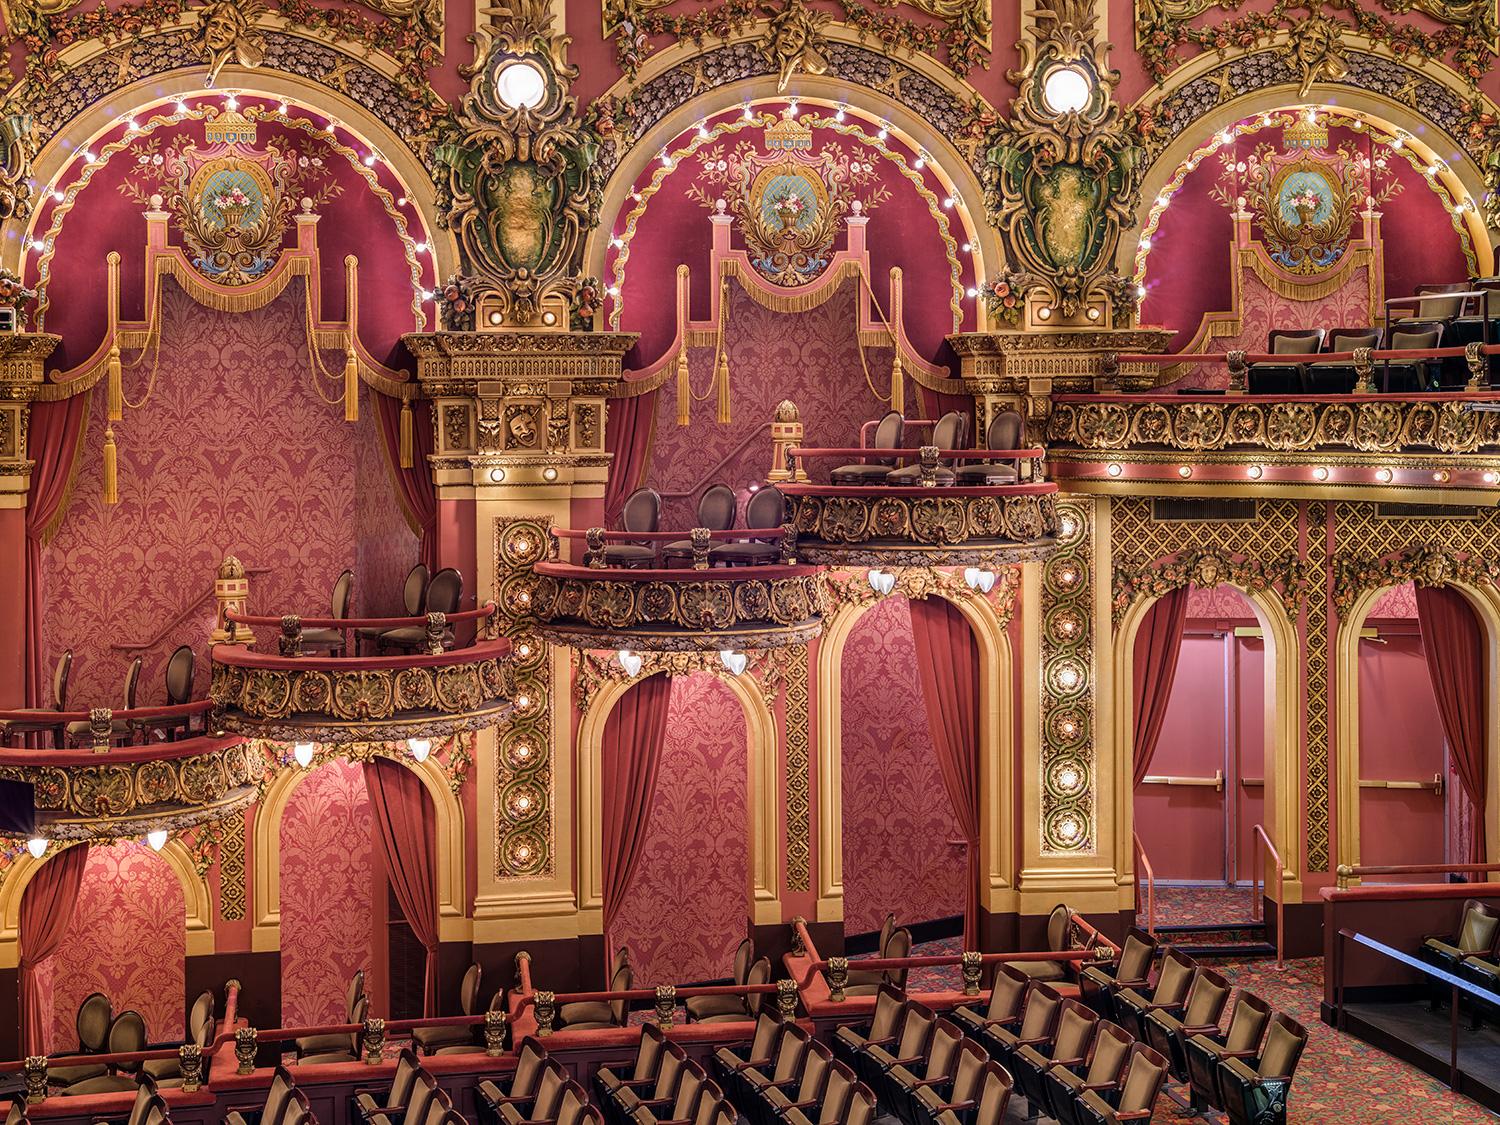 The Cutler Majestic Theatre is a 1903 bejewelled Beaux-Arts opera house and later vaudeville theatre built by architect John Galen Howard.

Series: Architecture of Gilded Dreams
Archival Pigment Canson Platine Print	
All available sizes and